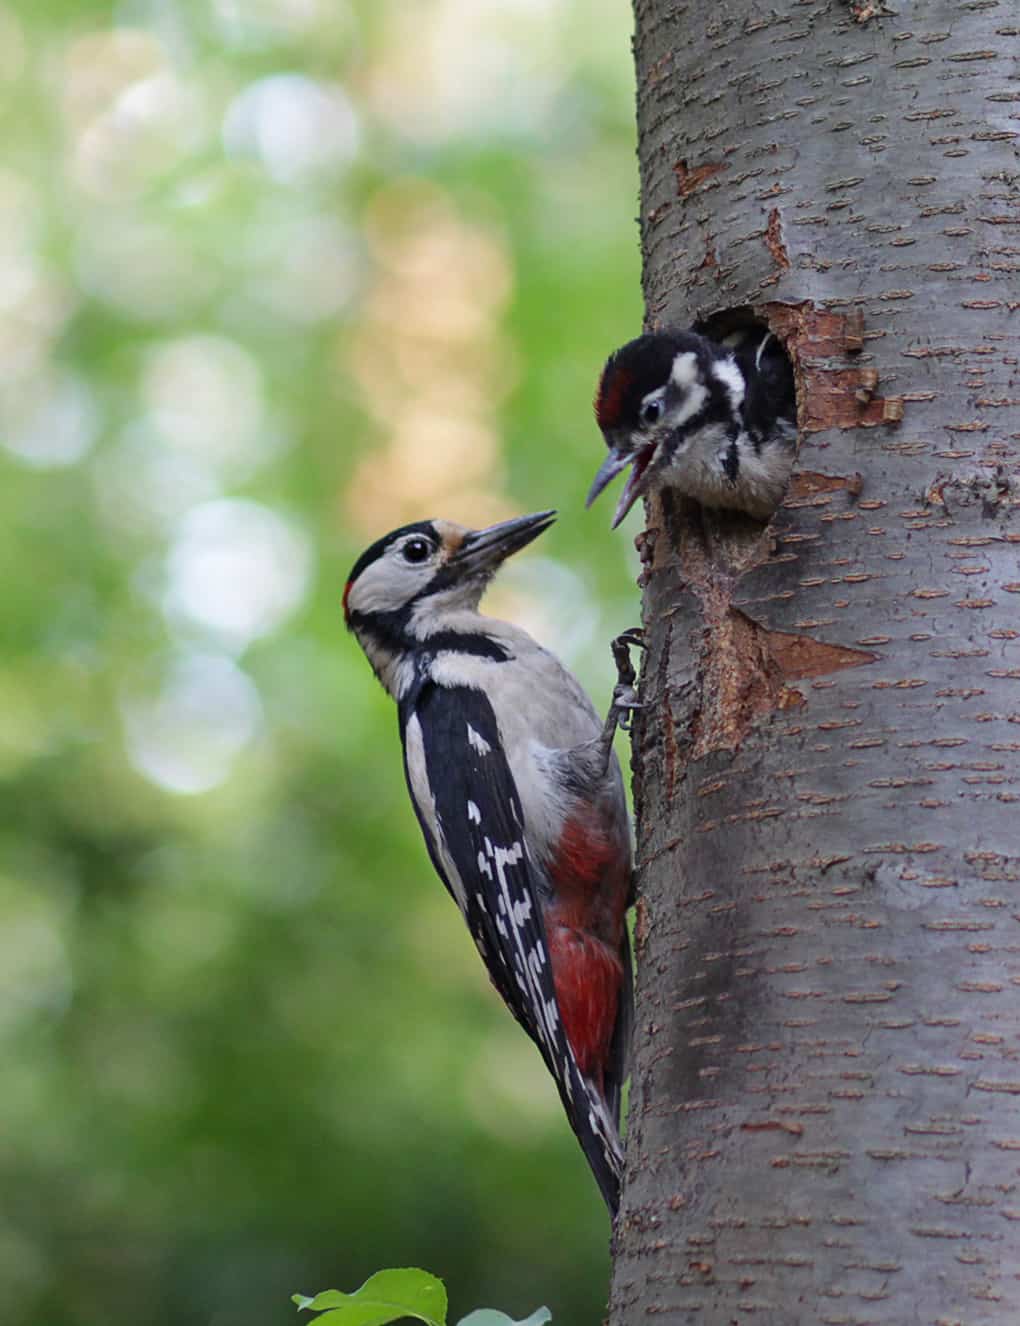 Woodpecker feeds the chick in the nest hollow. Birds